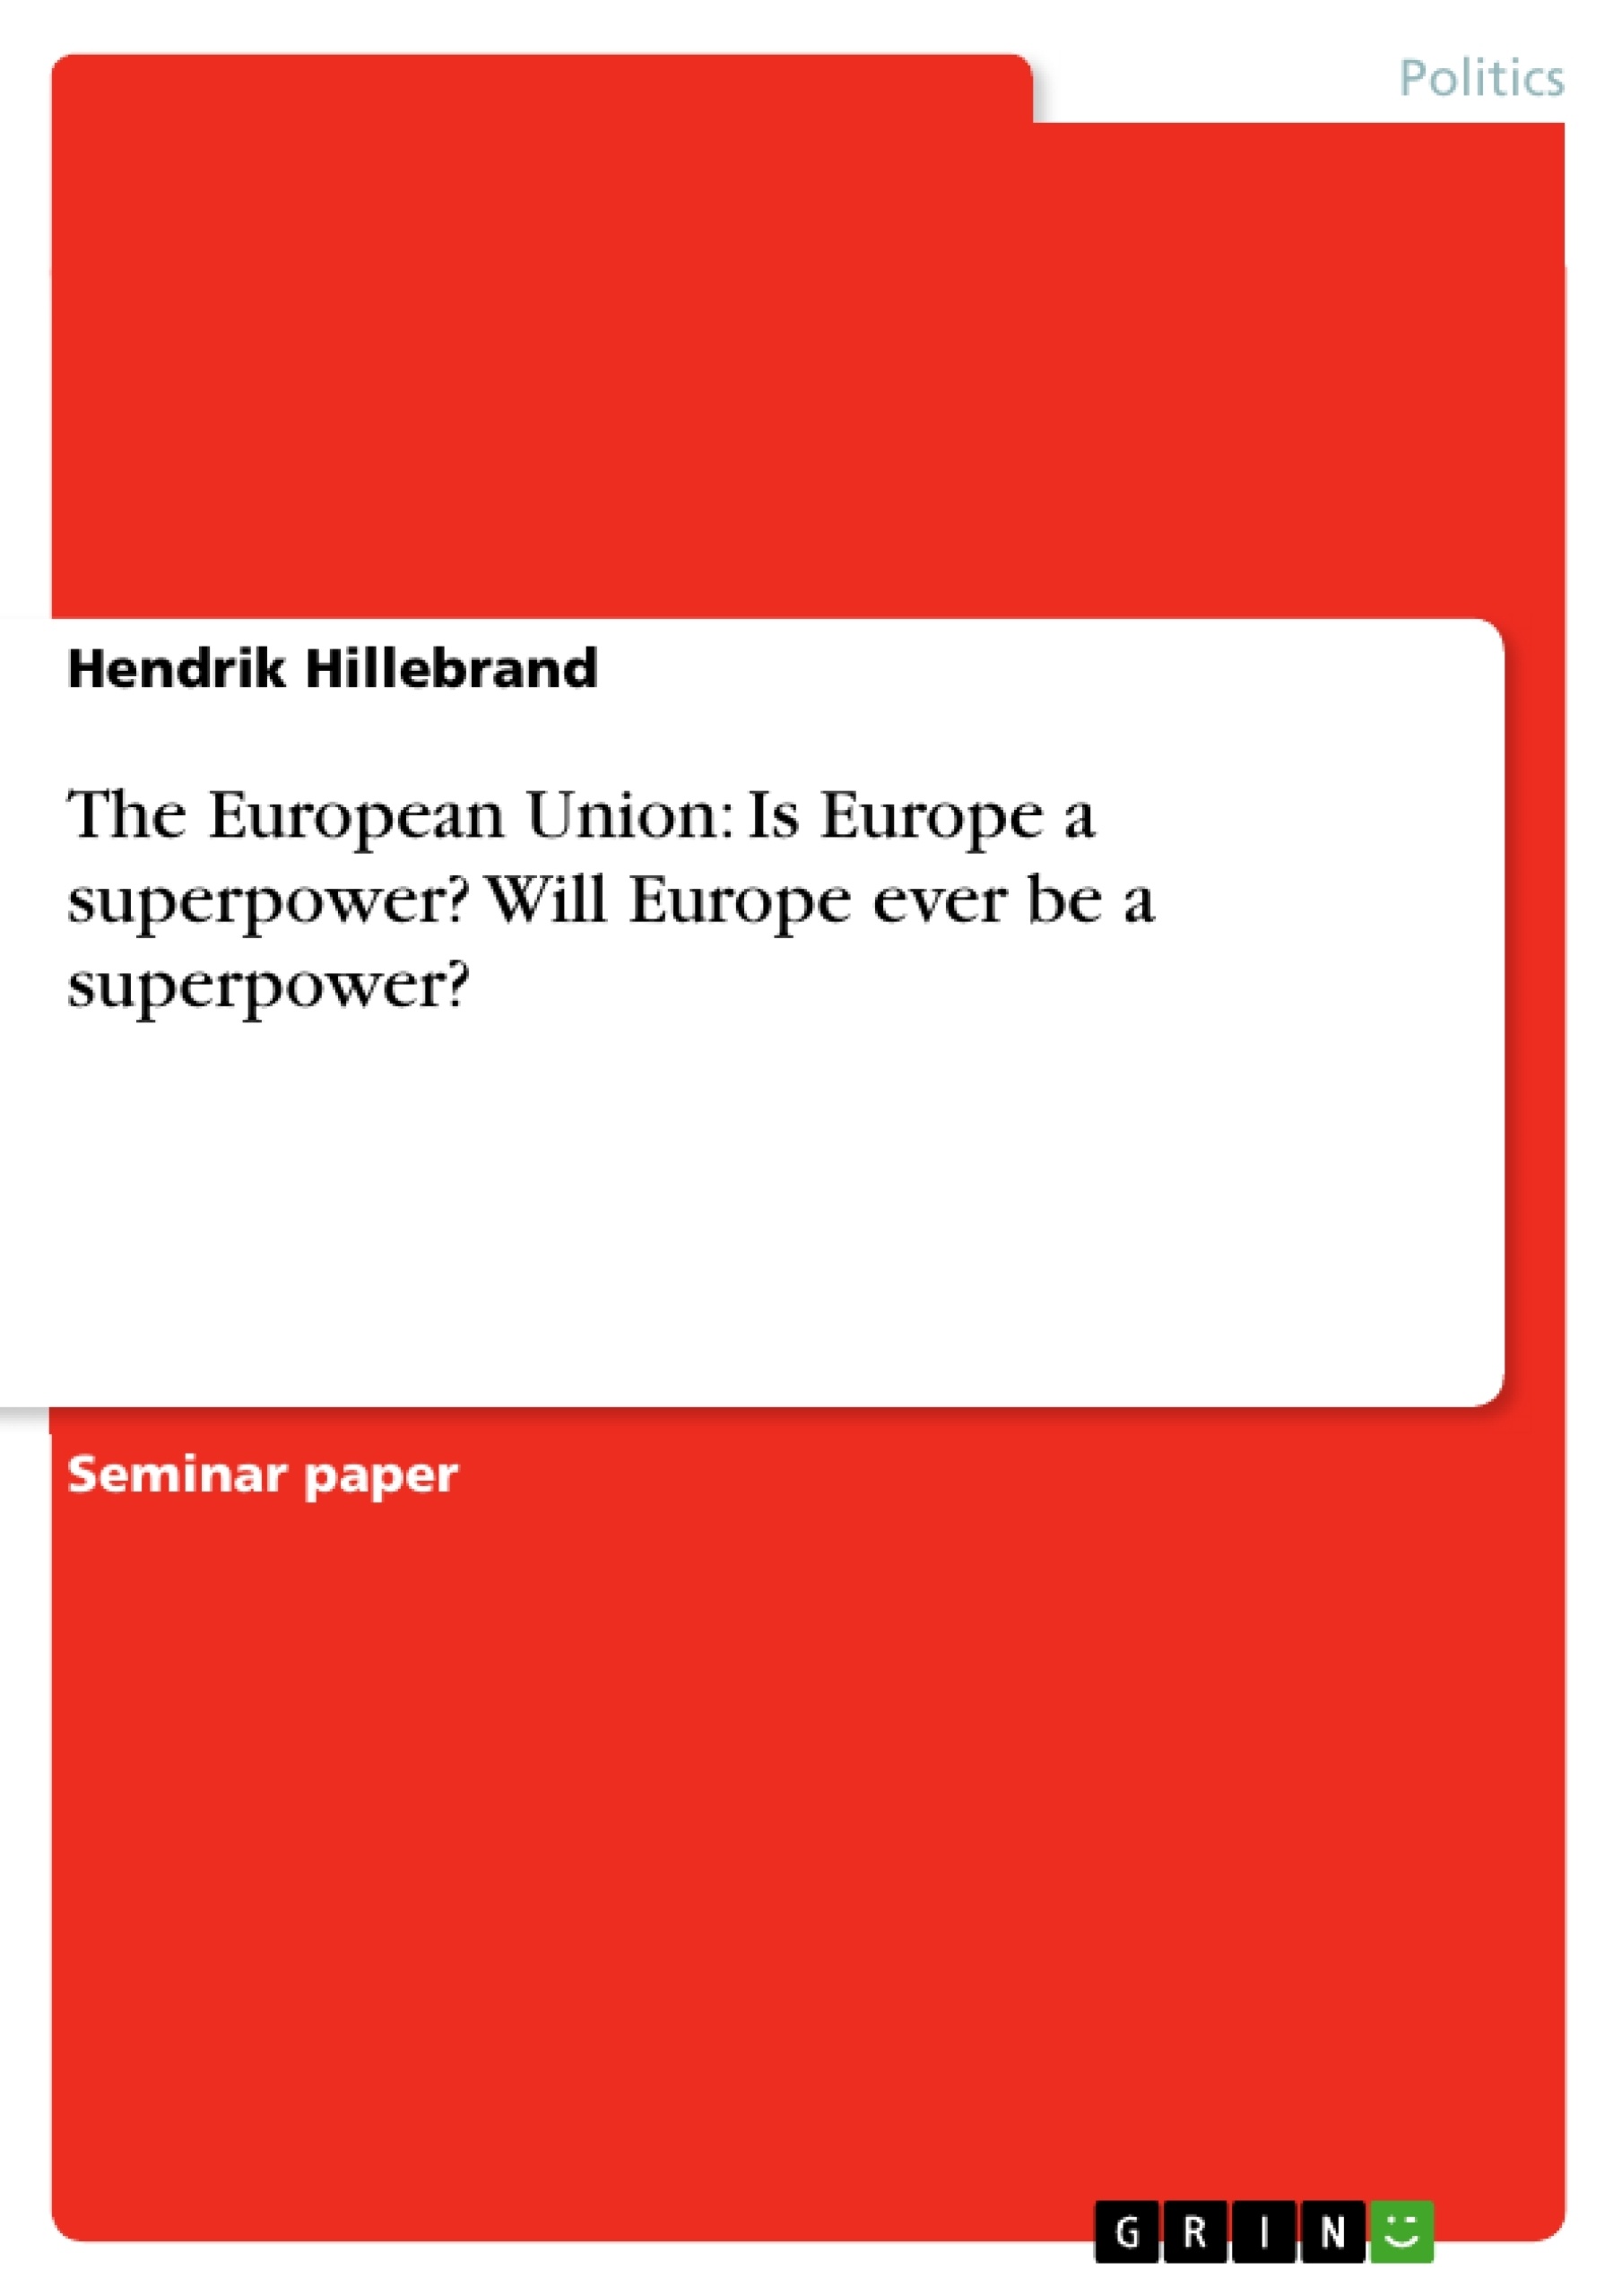 Title: The European Union: Is Europe a superpower? Will Europe ever be a superpower?